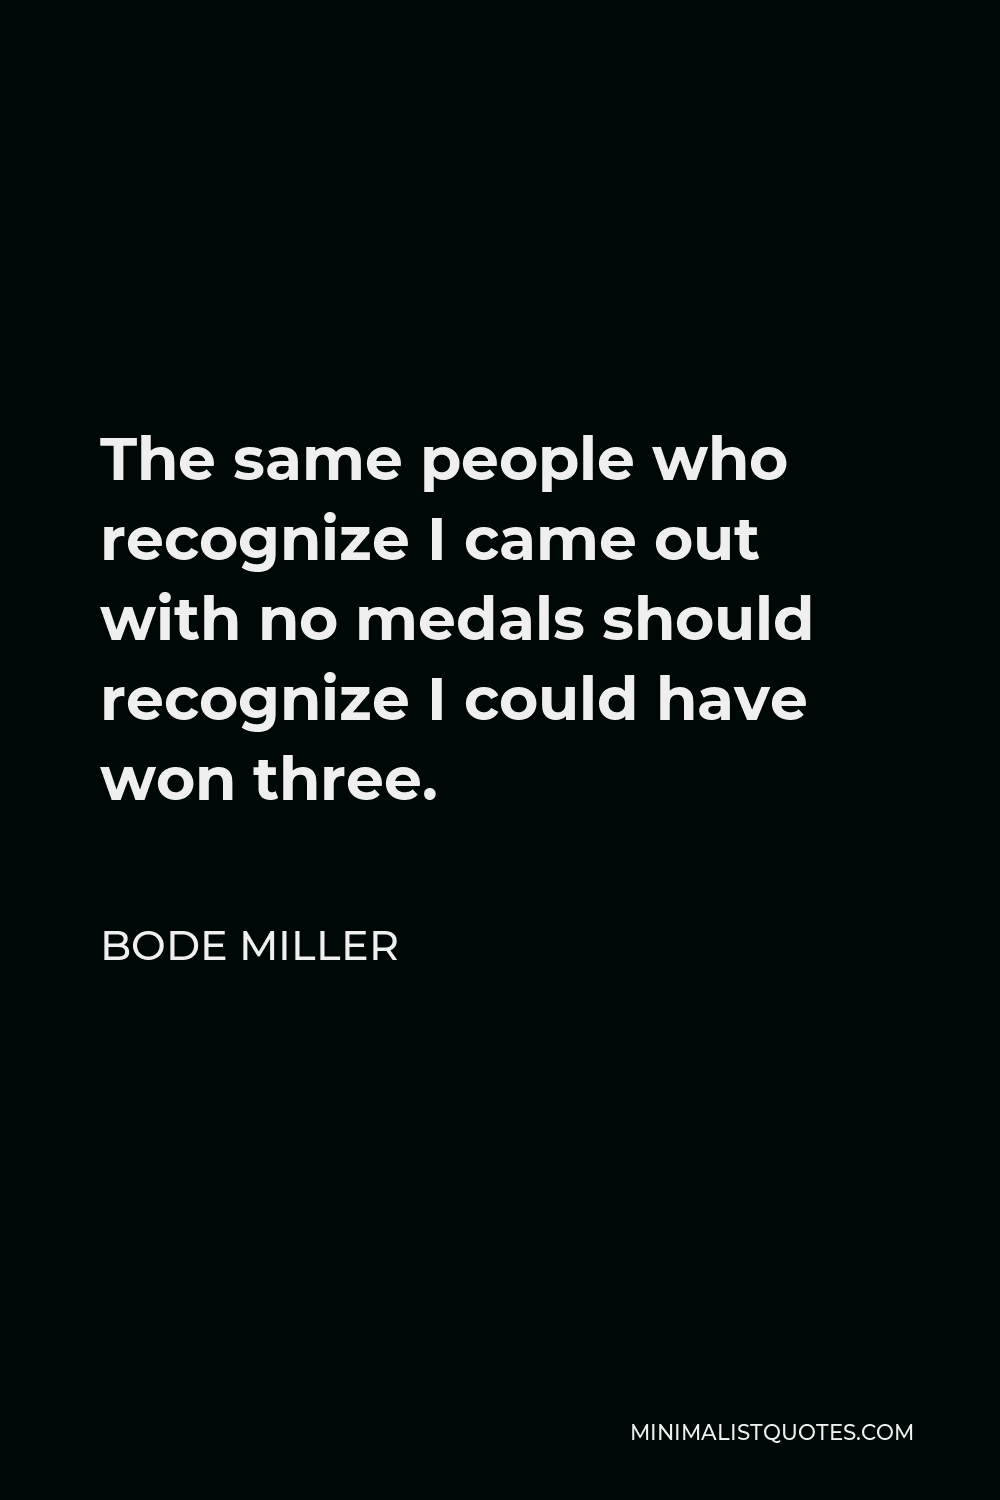 Bode Miller Quote - The same people who recognize I came out with no medals should recognize I could have won three.